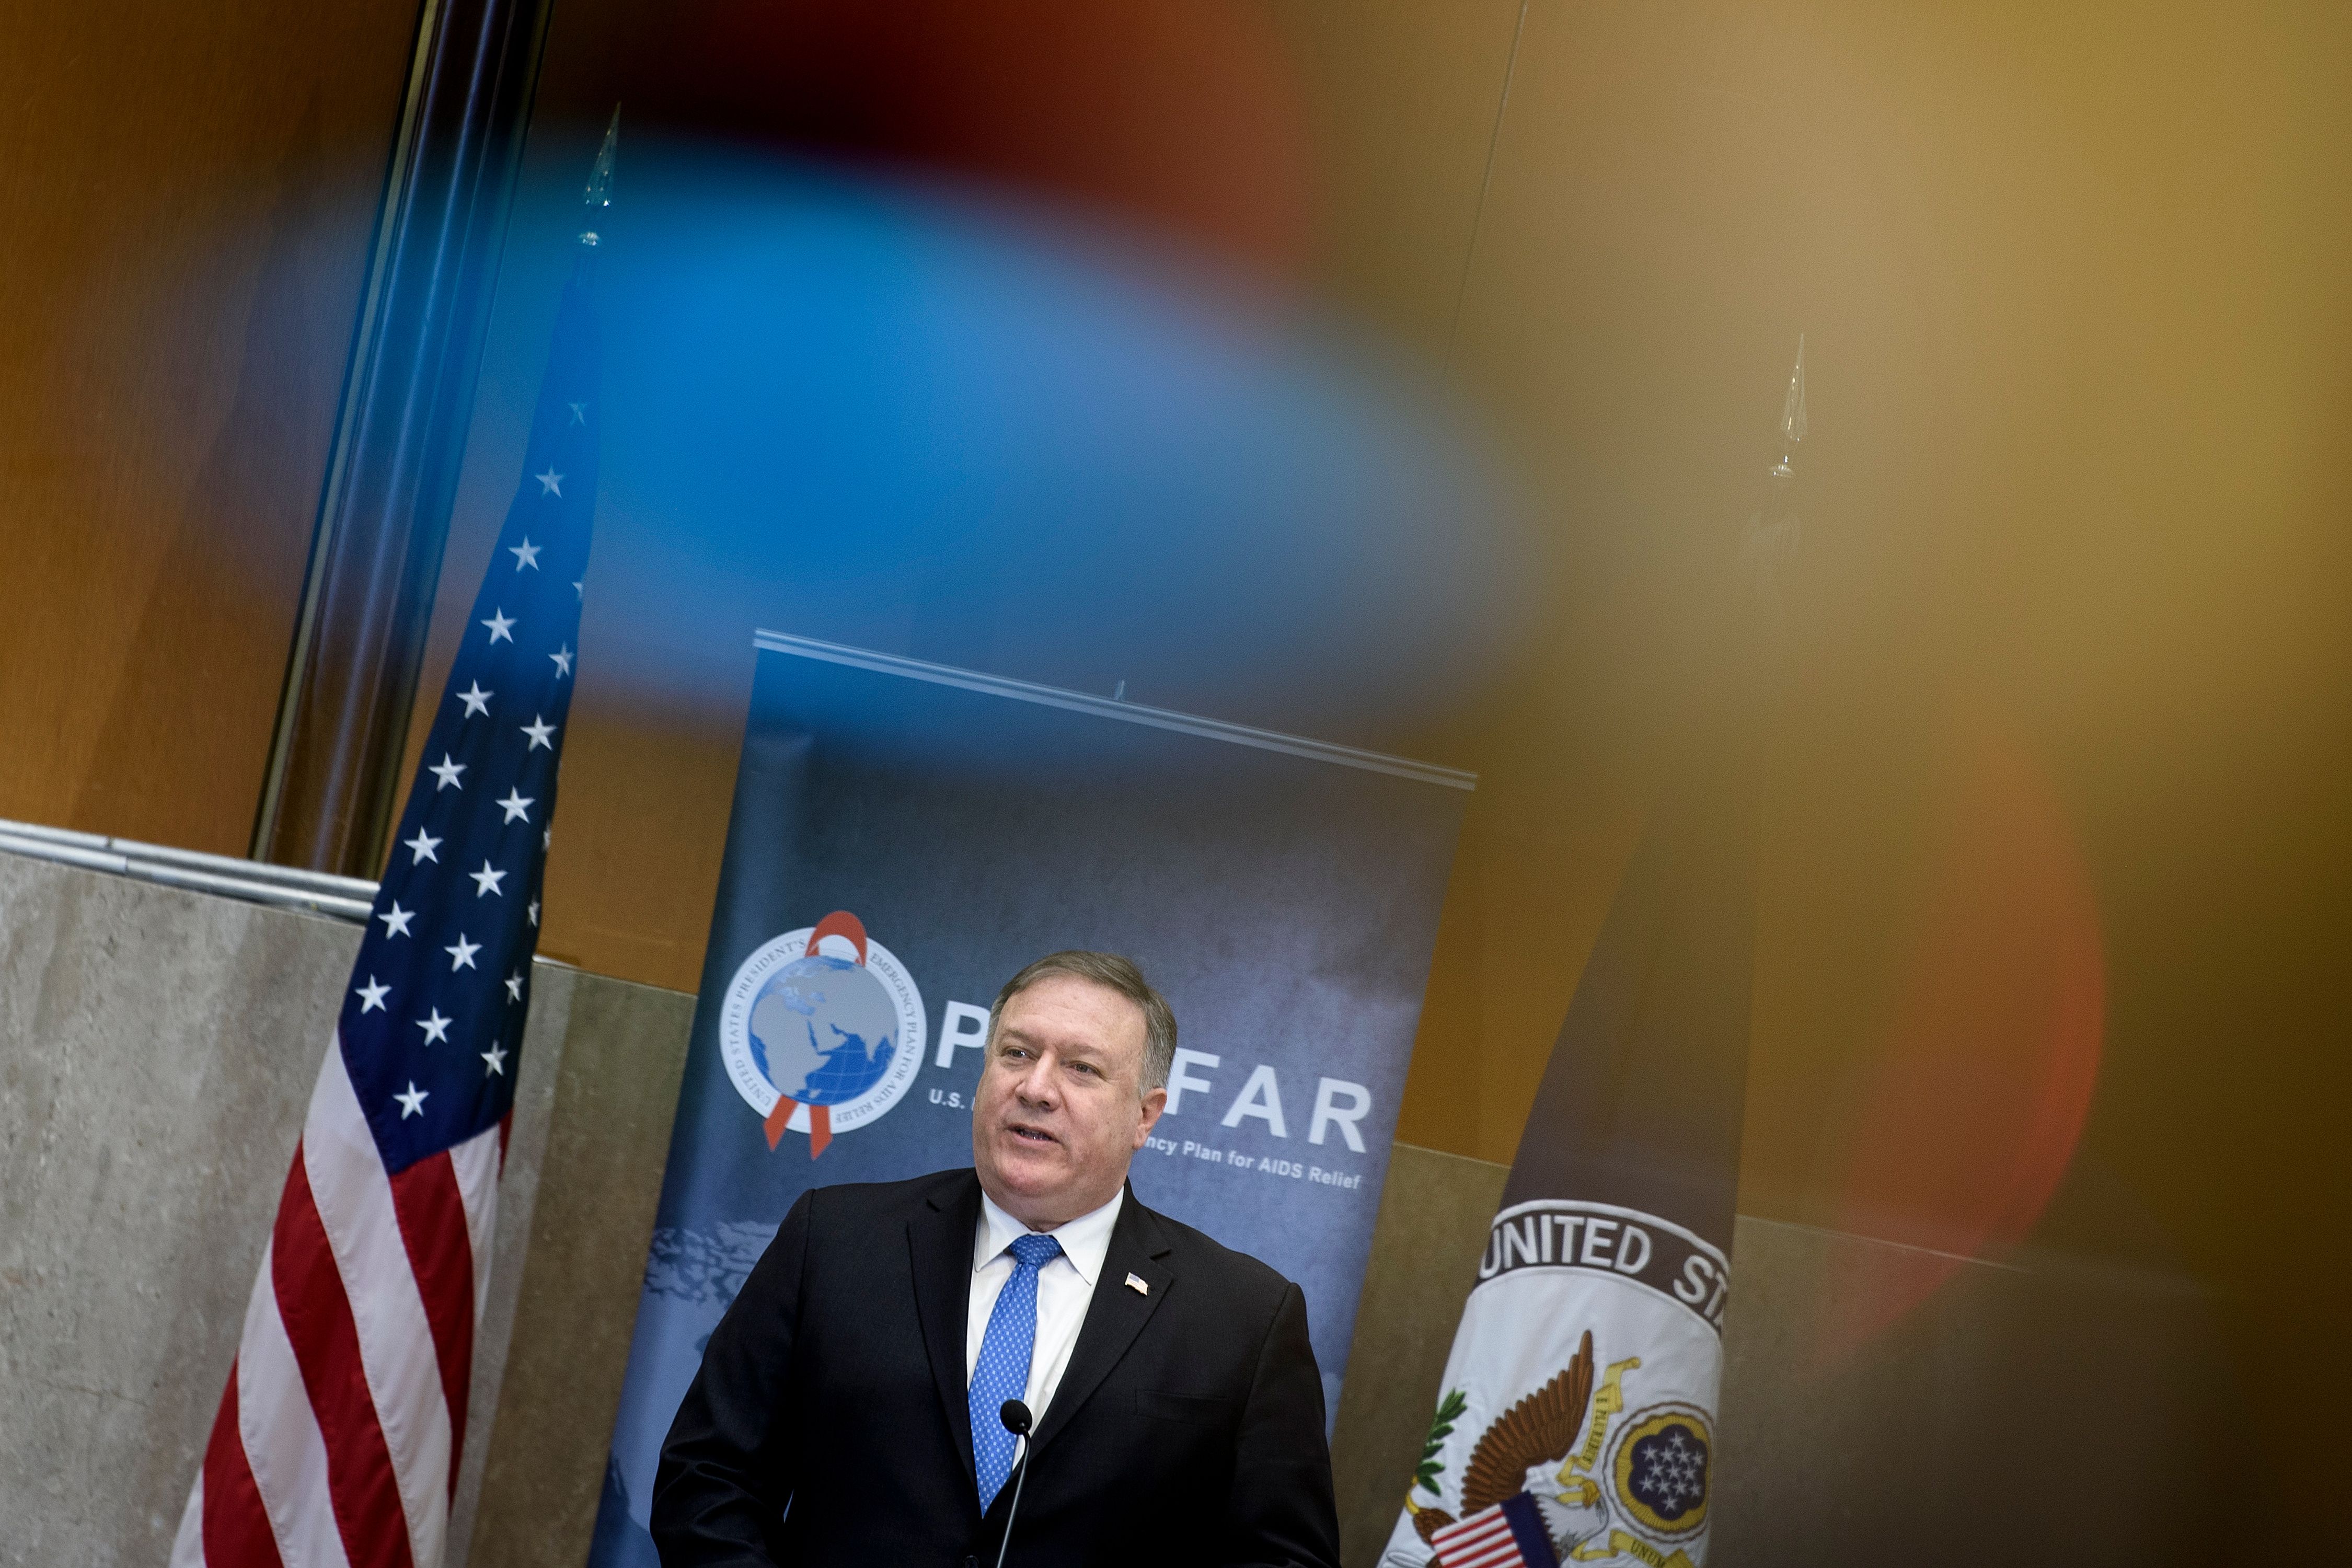 US Secretary of State Mike Pompeo speaks during an event PEPFAR (President's Emergency Plan For AIDS Relief) Faith Communities and HIV Technical Summit at the US Department of State November 27, 2018 in Washington, DC. (Photo by Brendan Smialowski / AFP) (SMIALOWSKI/AFP/Getty Images)